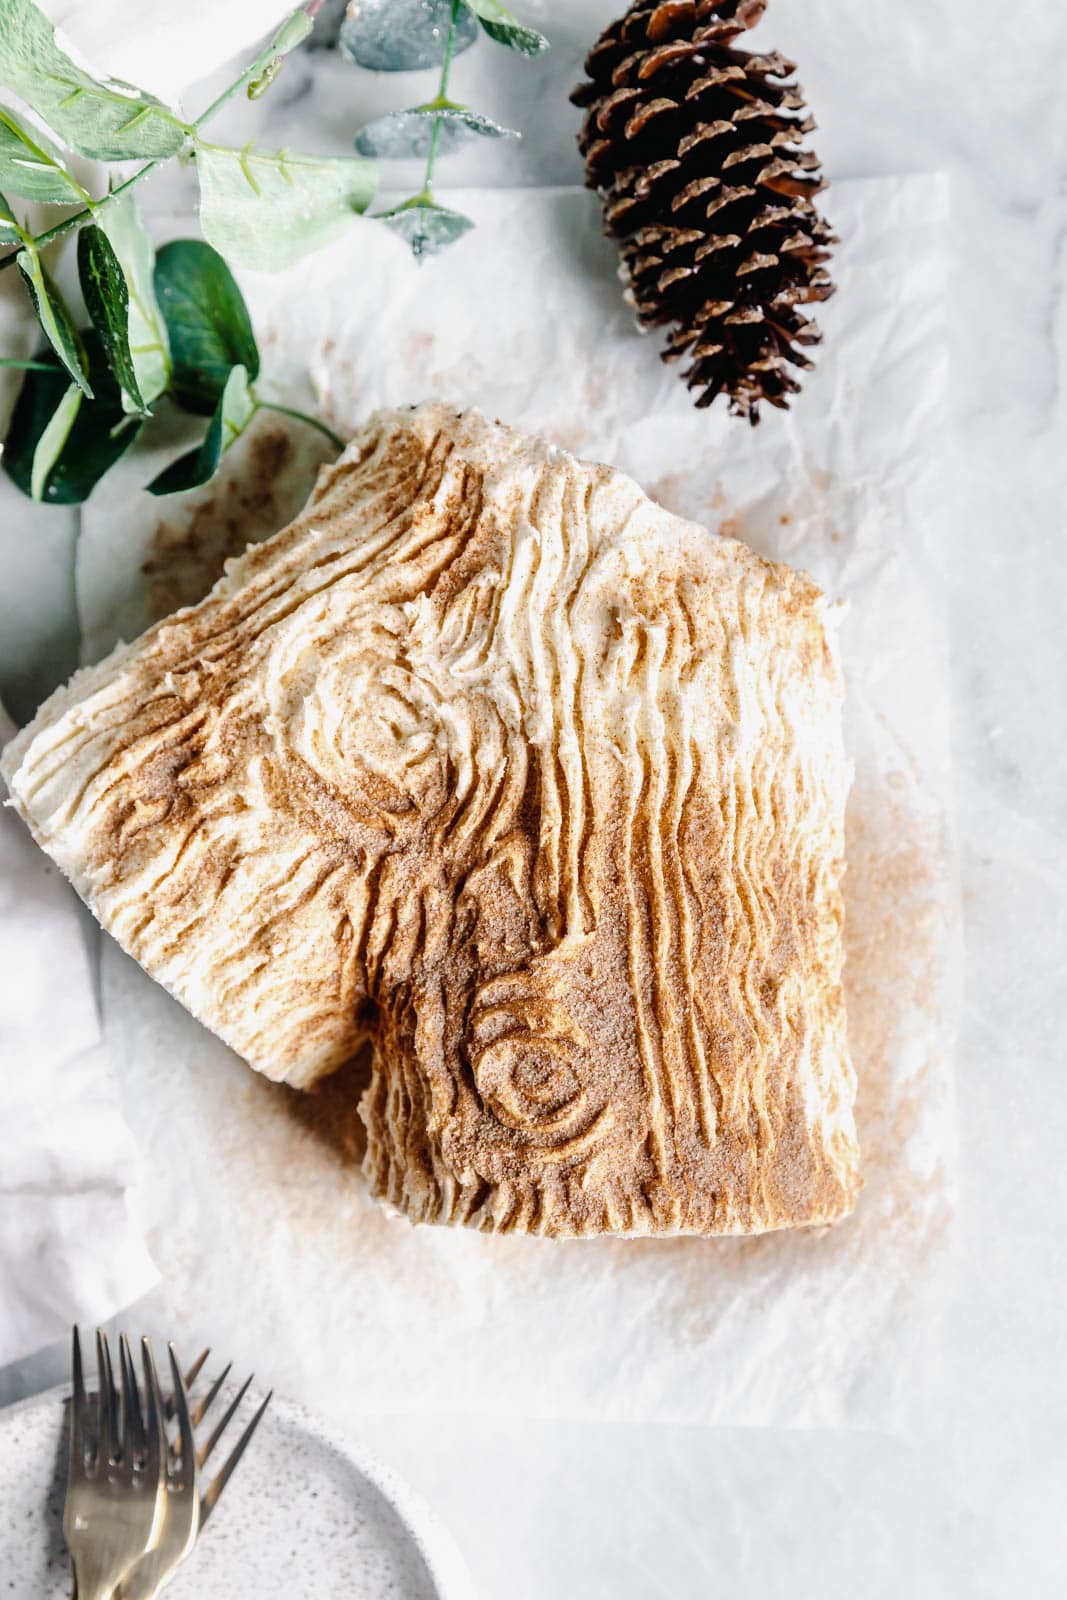 This festive White Chocolate Gingerbread Yule Log is a showstopper Christmas dessert. Made with white chocolate buttercream "bark" for that rustic look!